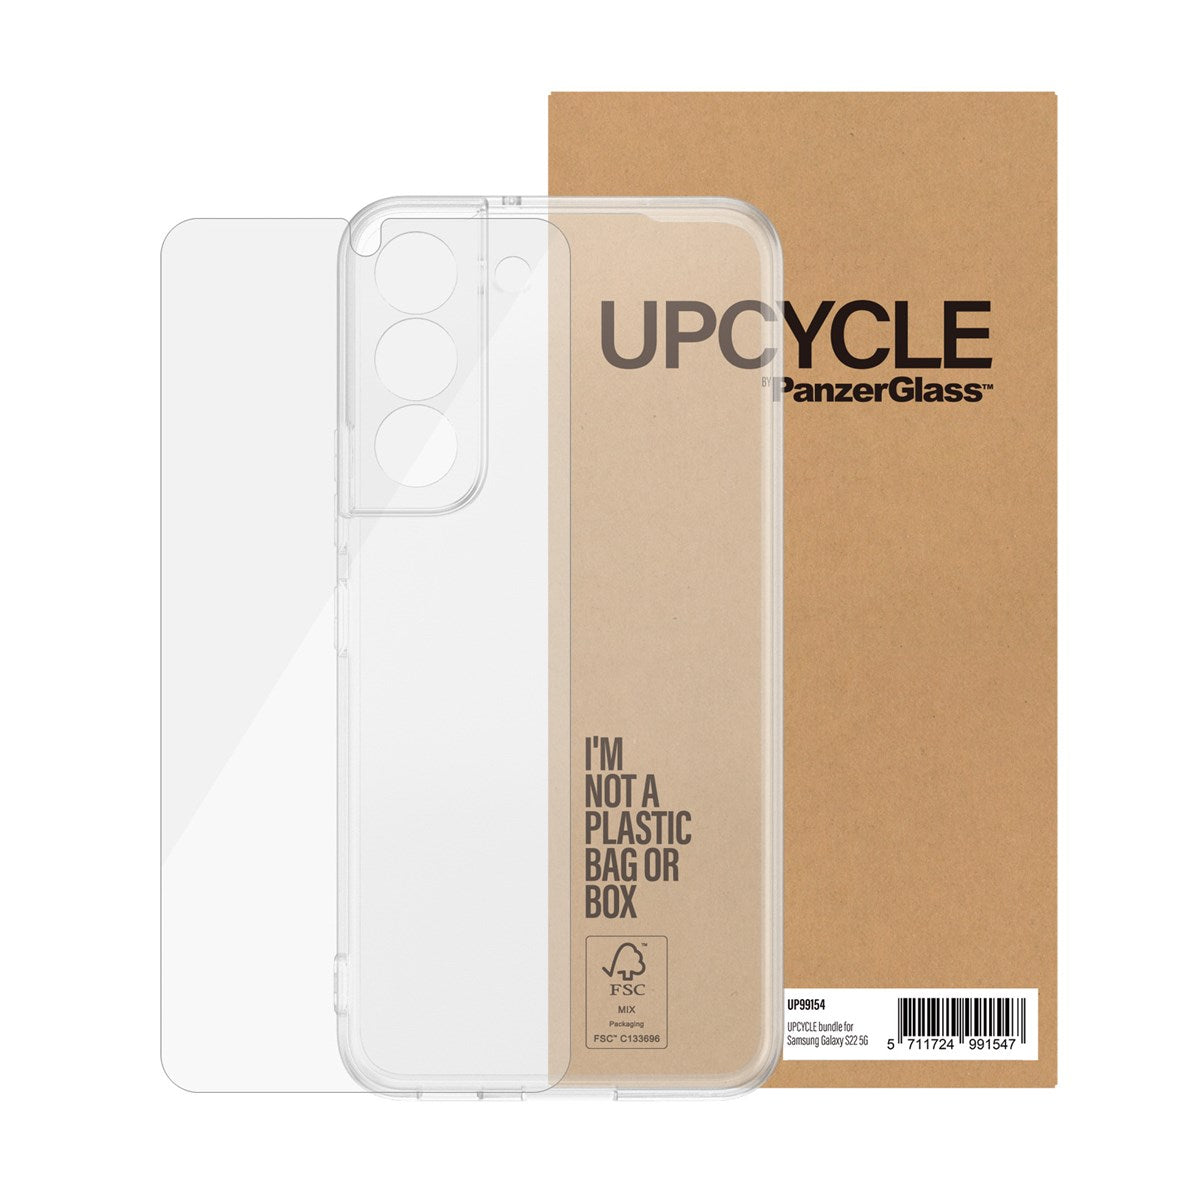 Upcycle by PanzerGlass Case and Screen Protector For Samsung Galaxy S22 5G Clear New - Sealed